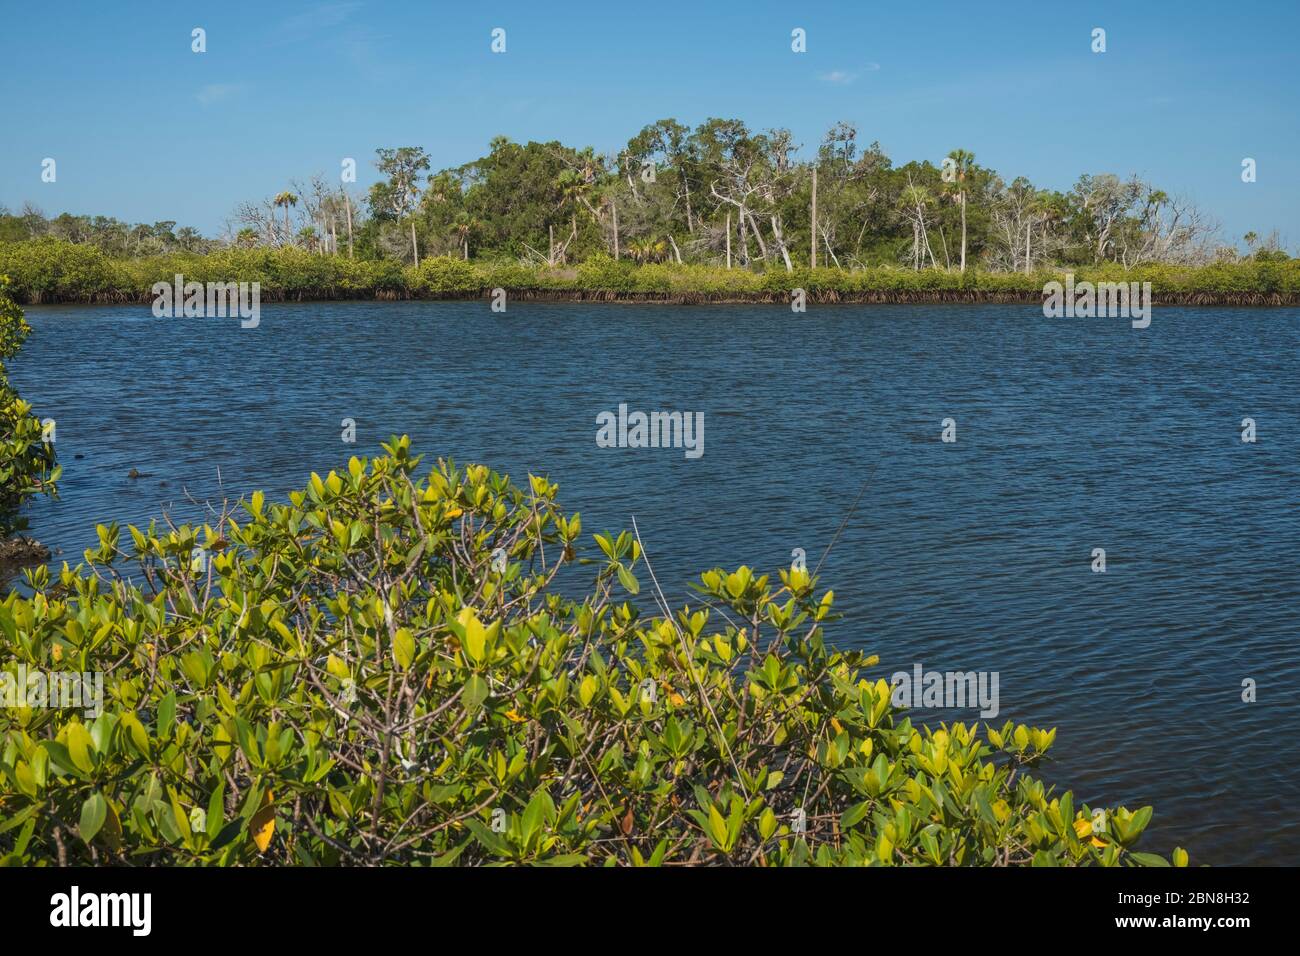 Coastal Salt Marsh in Citrus County, Florida. Open water area with a mangrove shoreline. A scenic coastal habitat in North Central Florida along the G Stock Photo